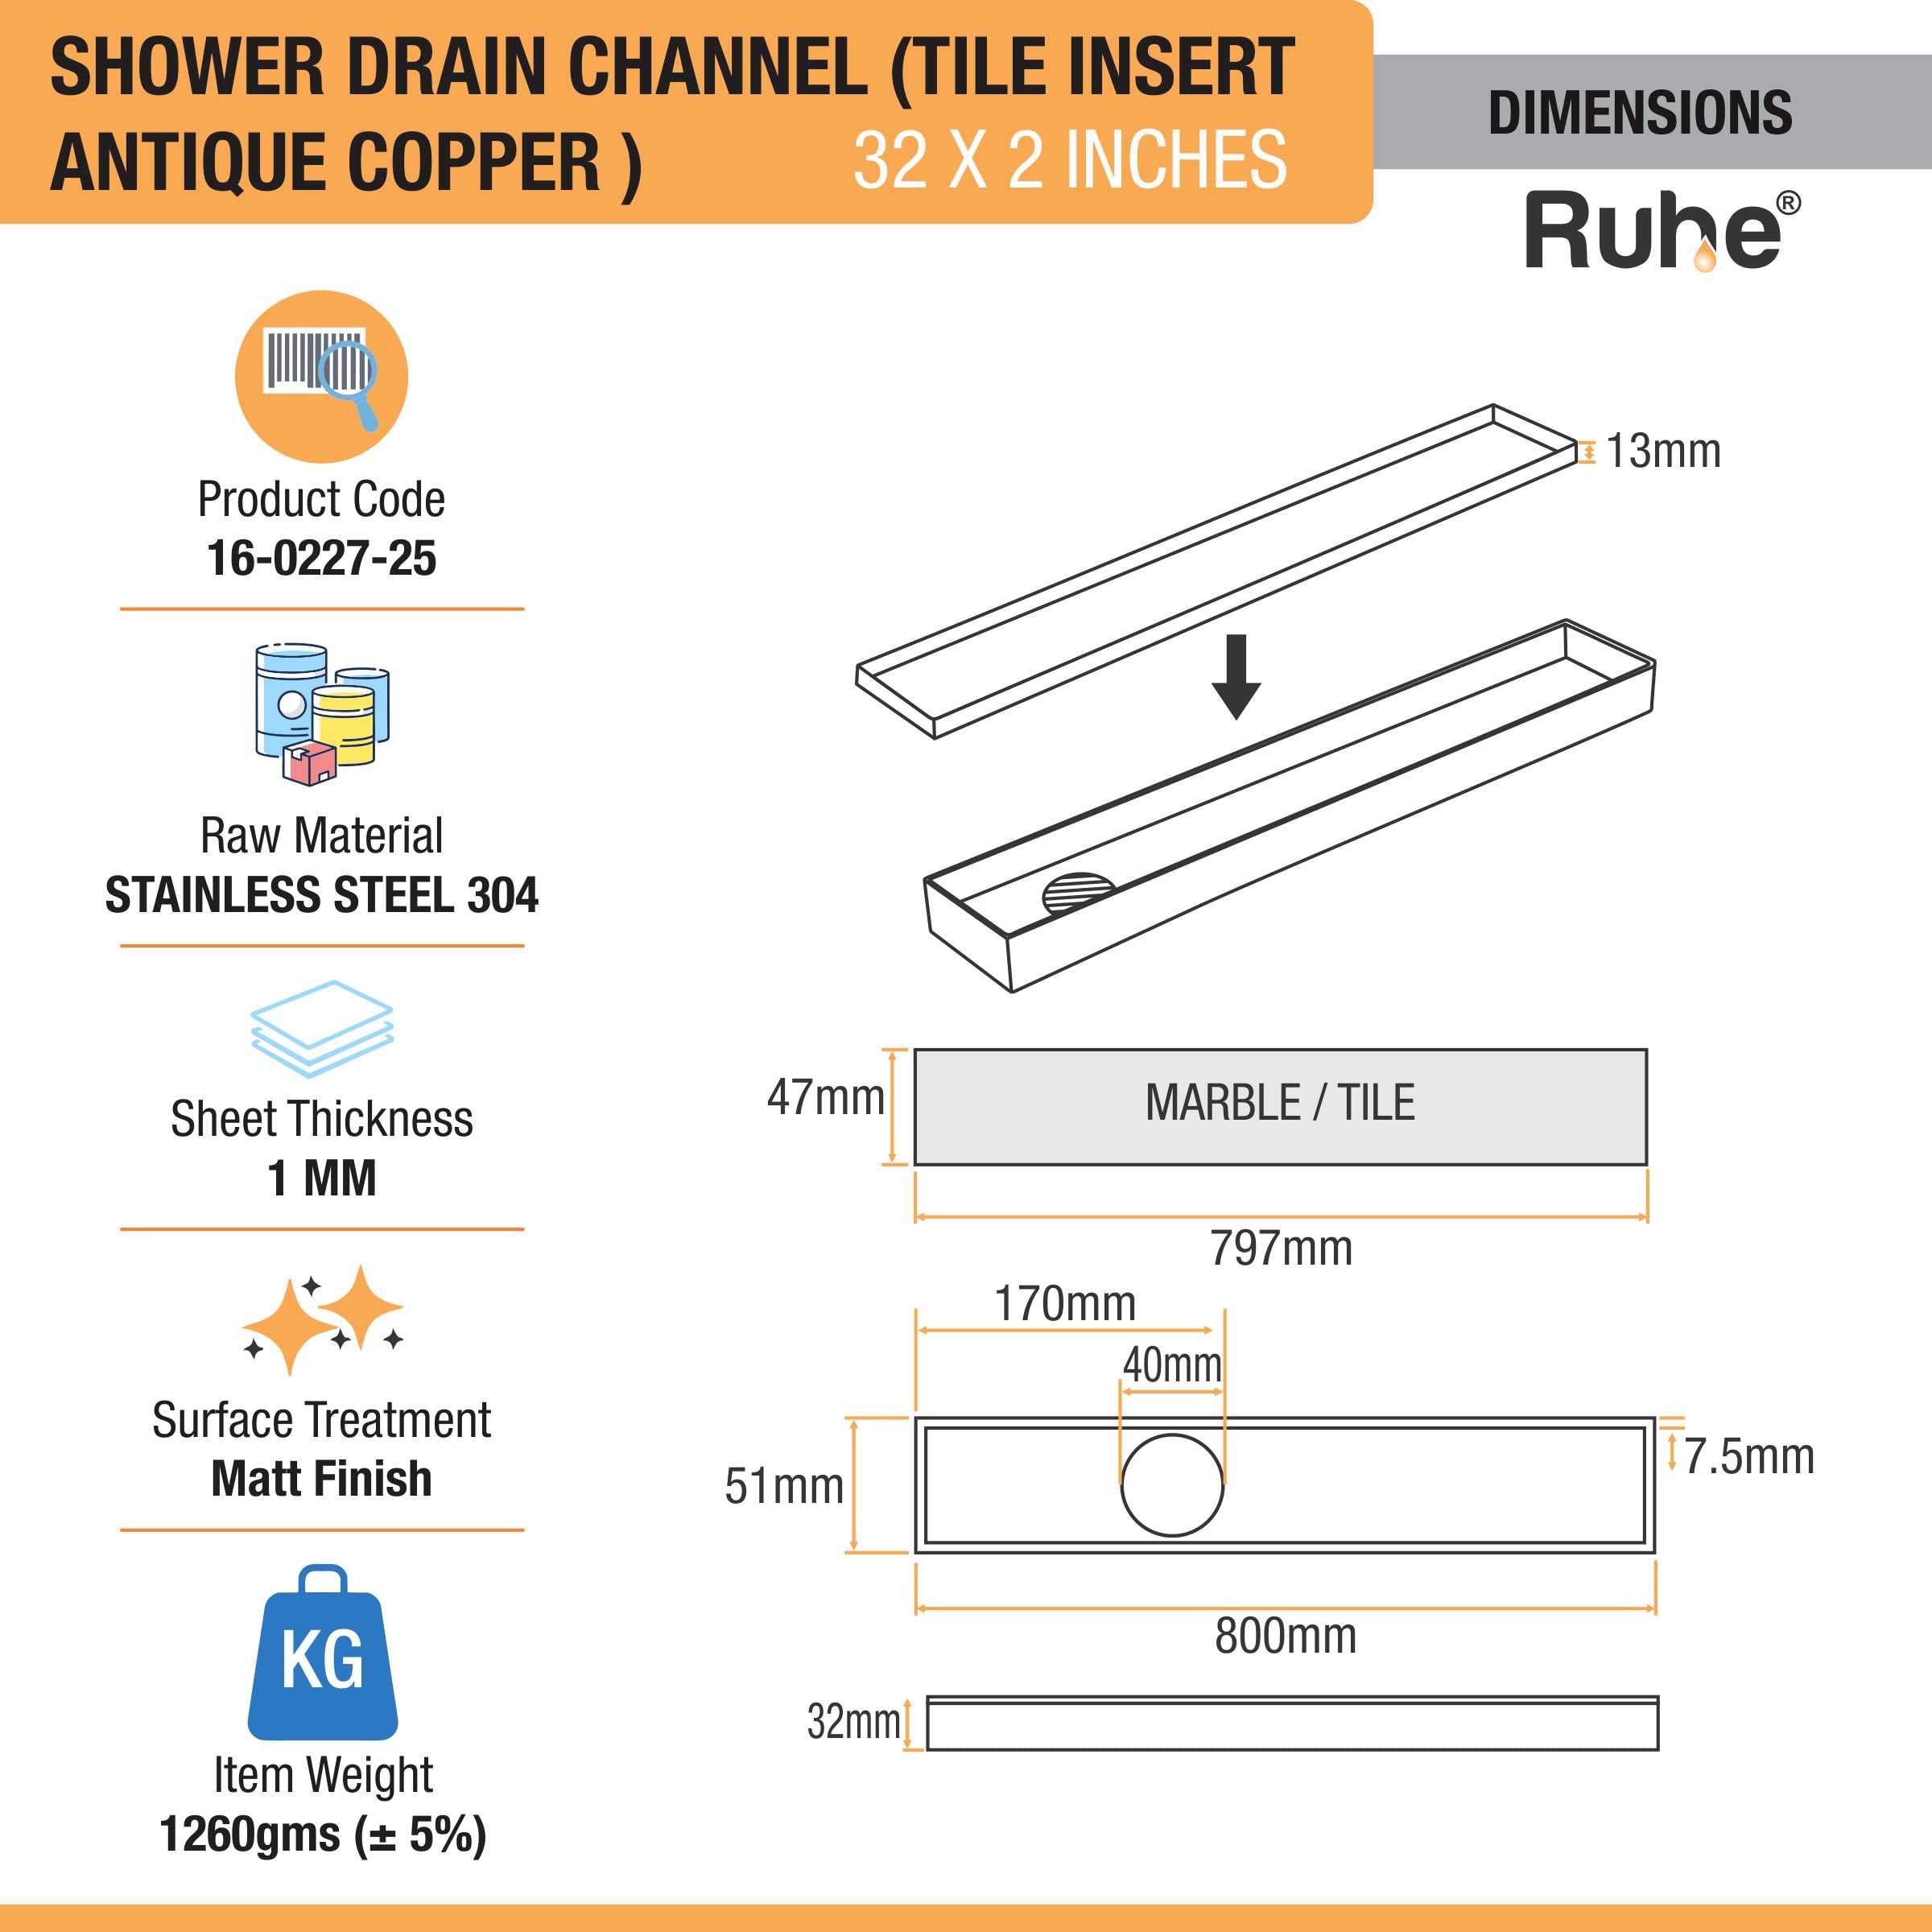 Tile Insert Shower Drain Channel (32 x 2 Inches) ROSE GOLD/ANTIQUE COPPER dimensions and size